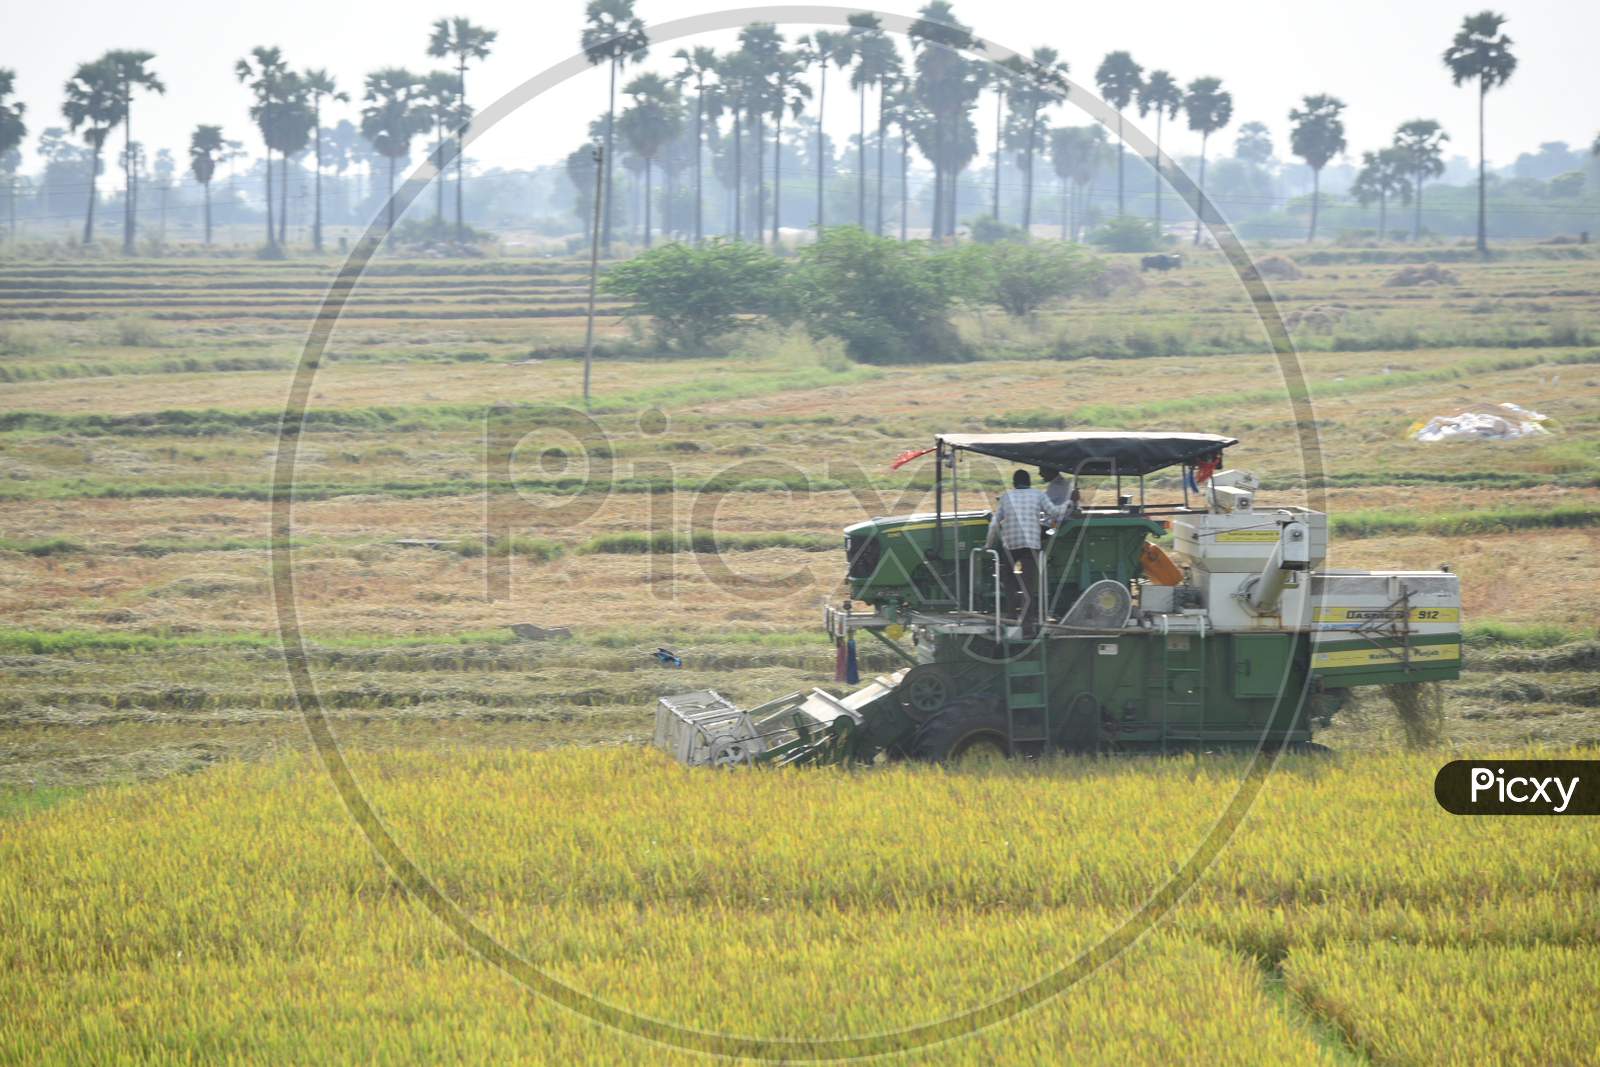 Farmers use Paddy Cutting machinery to extract Paddy from the crops as the daily labour